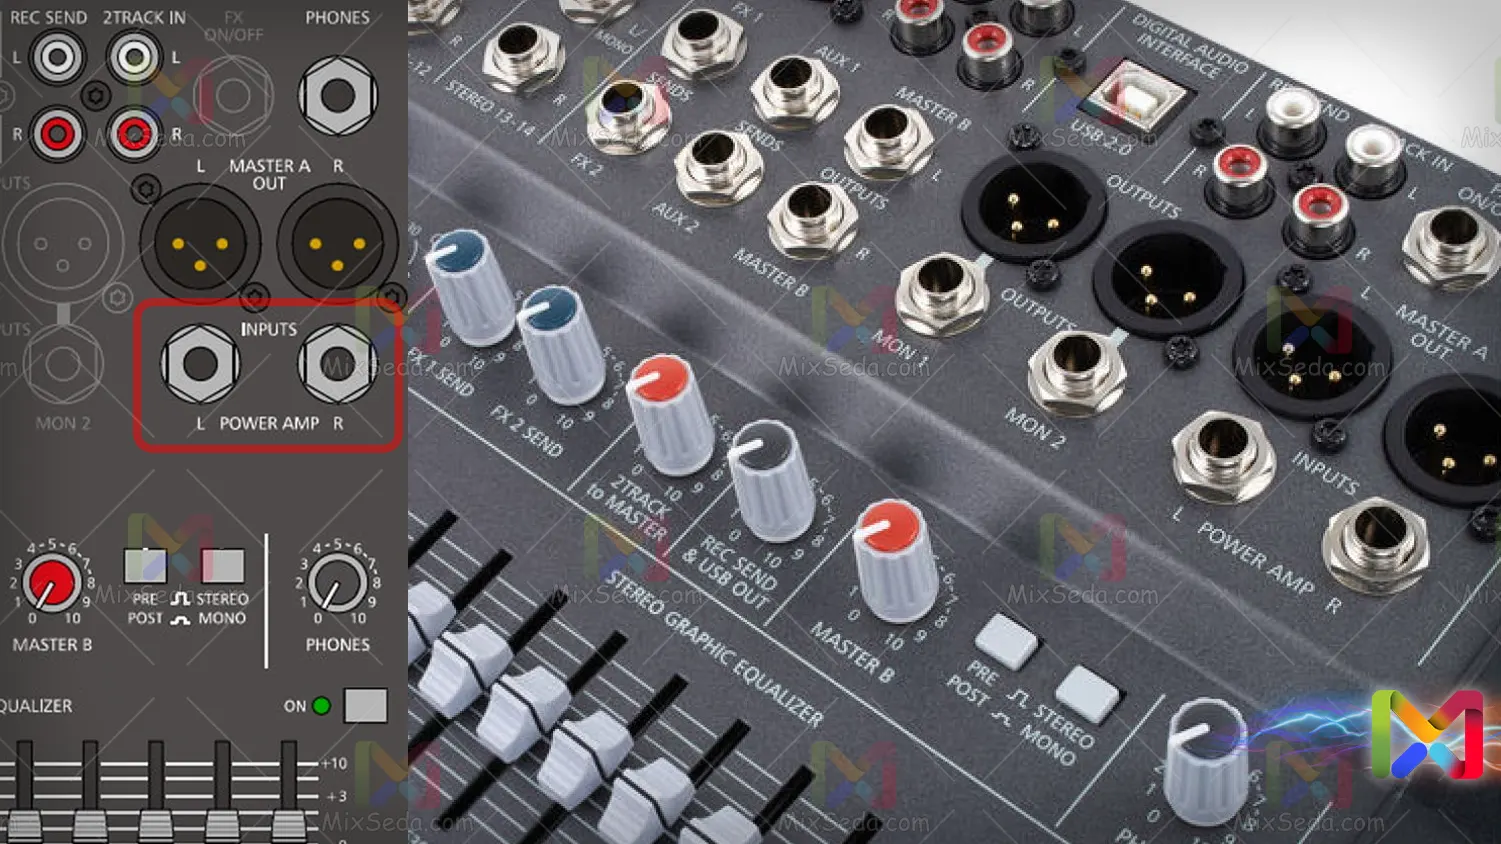 Power amp input in Dynacord mixer